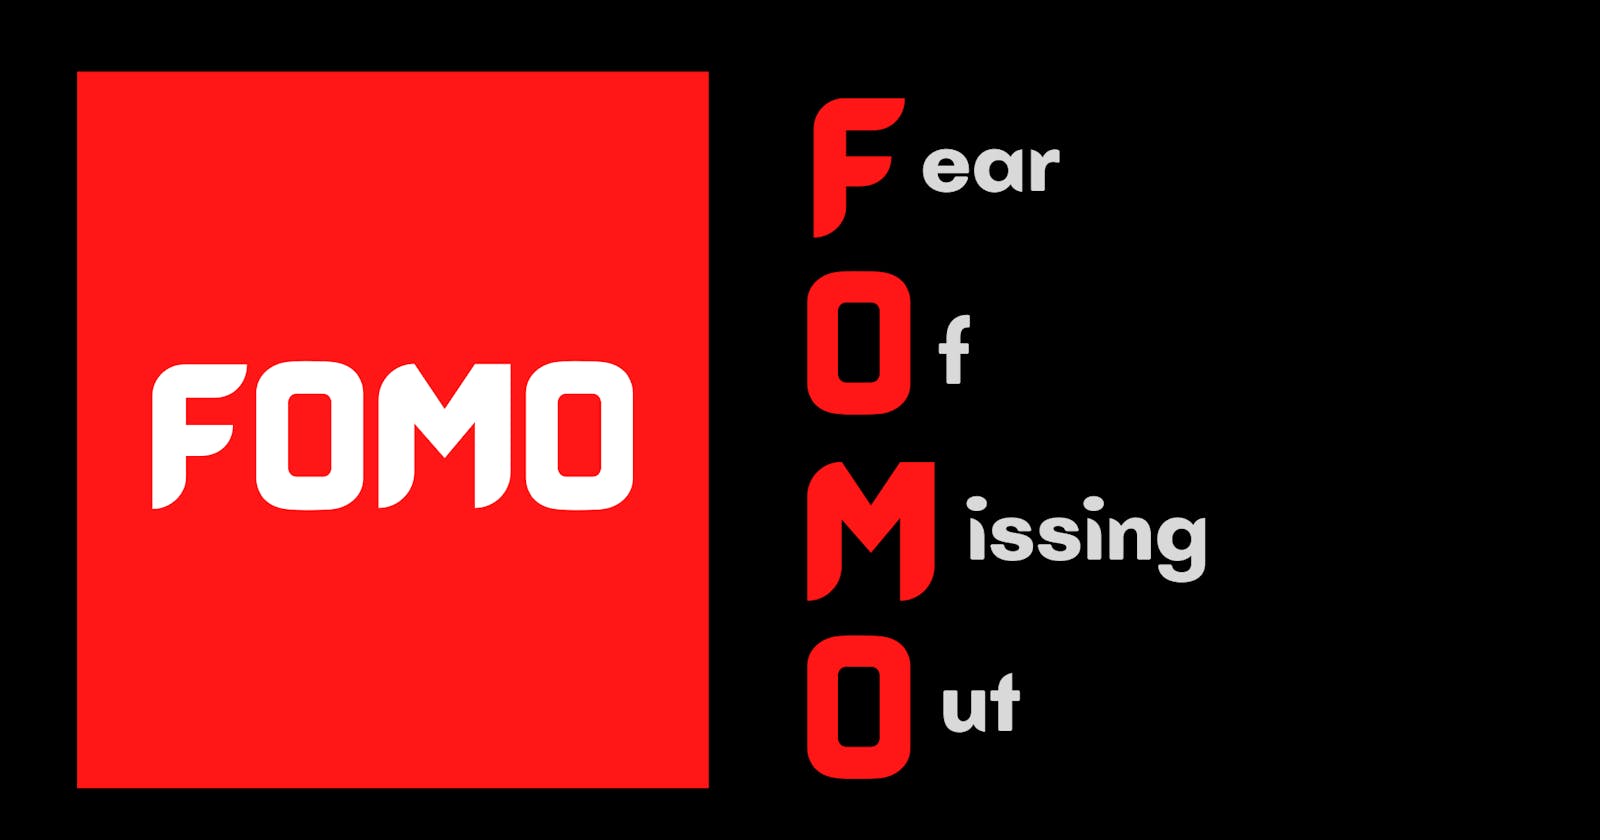 FOMO: The Fear of Missing Out